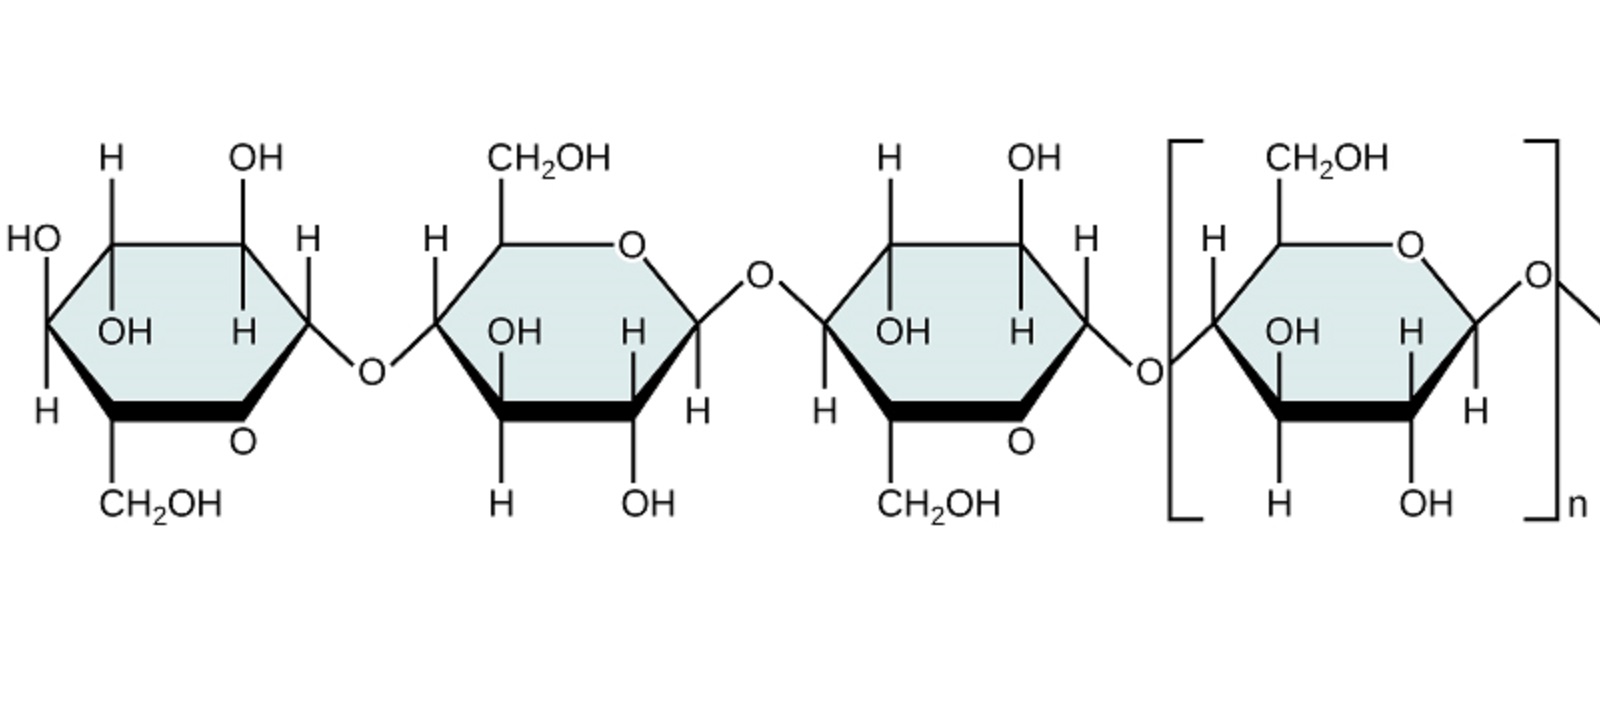 Chemical structure of cellulose